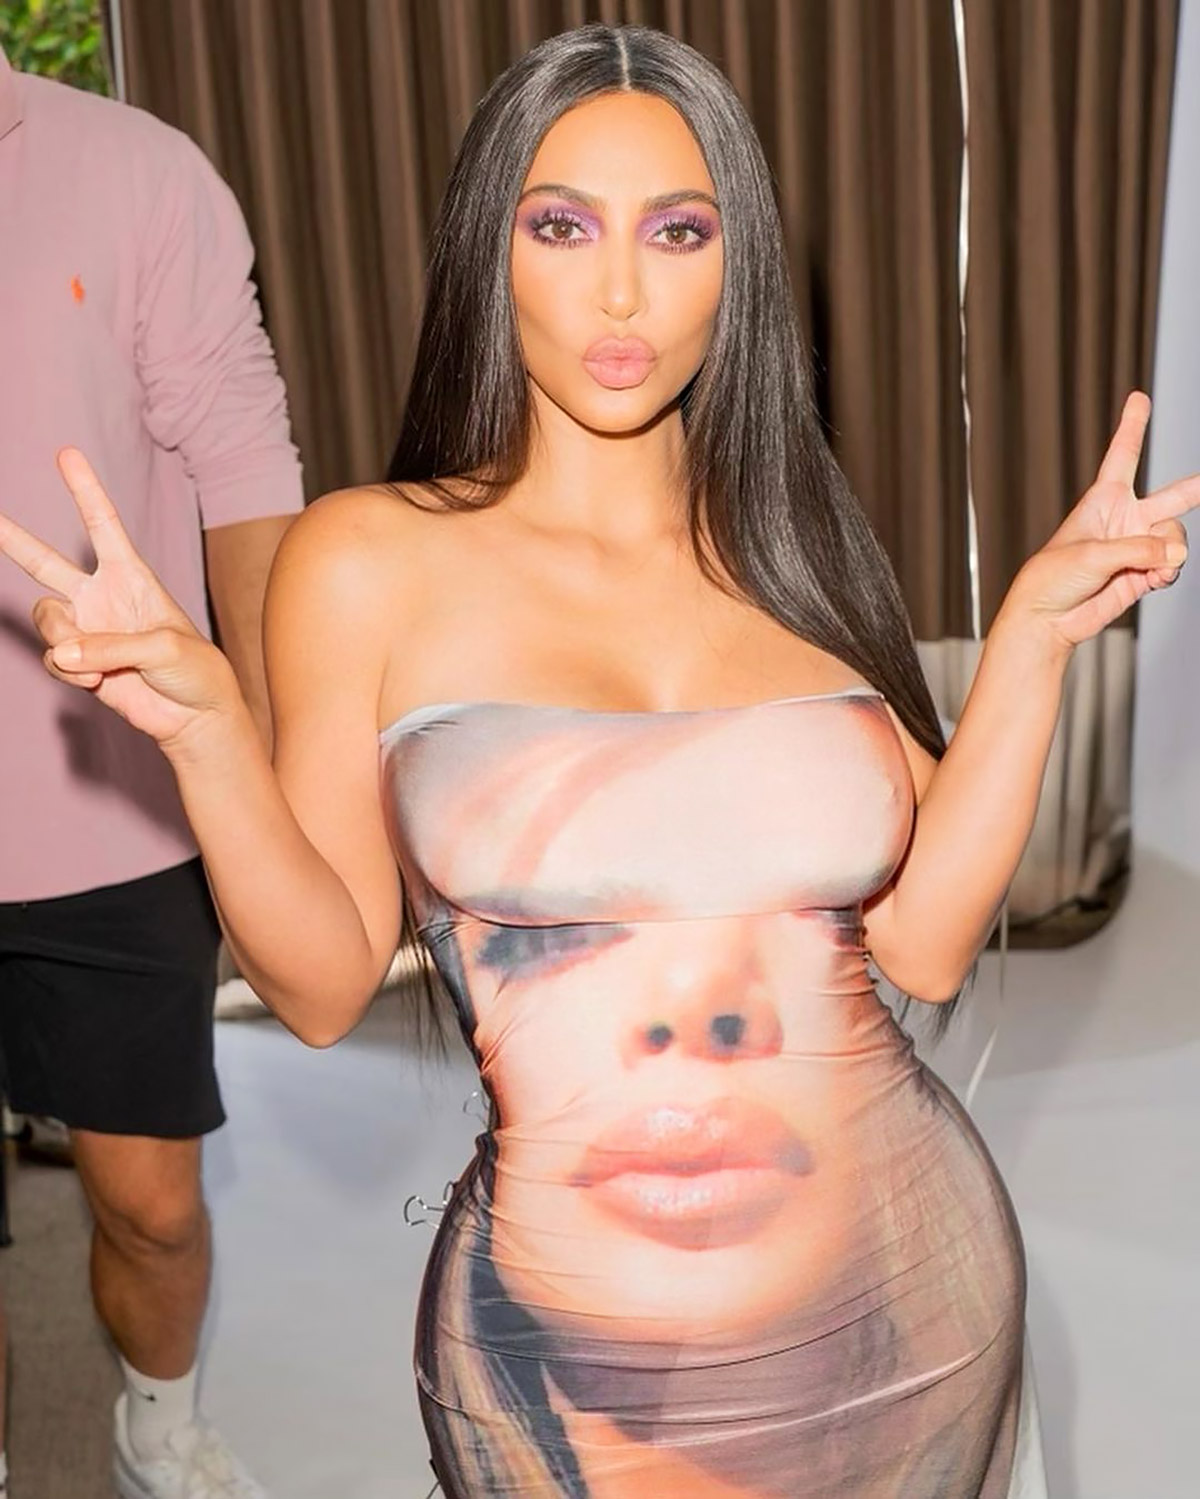 Kim Kardashian Wears a Dress With Her Face on It for KKW Beauty Shoot